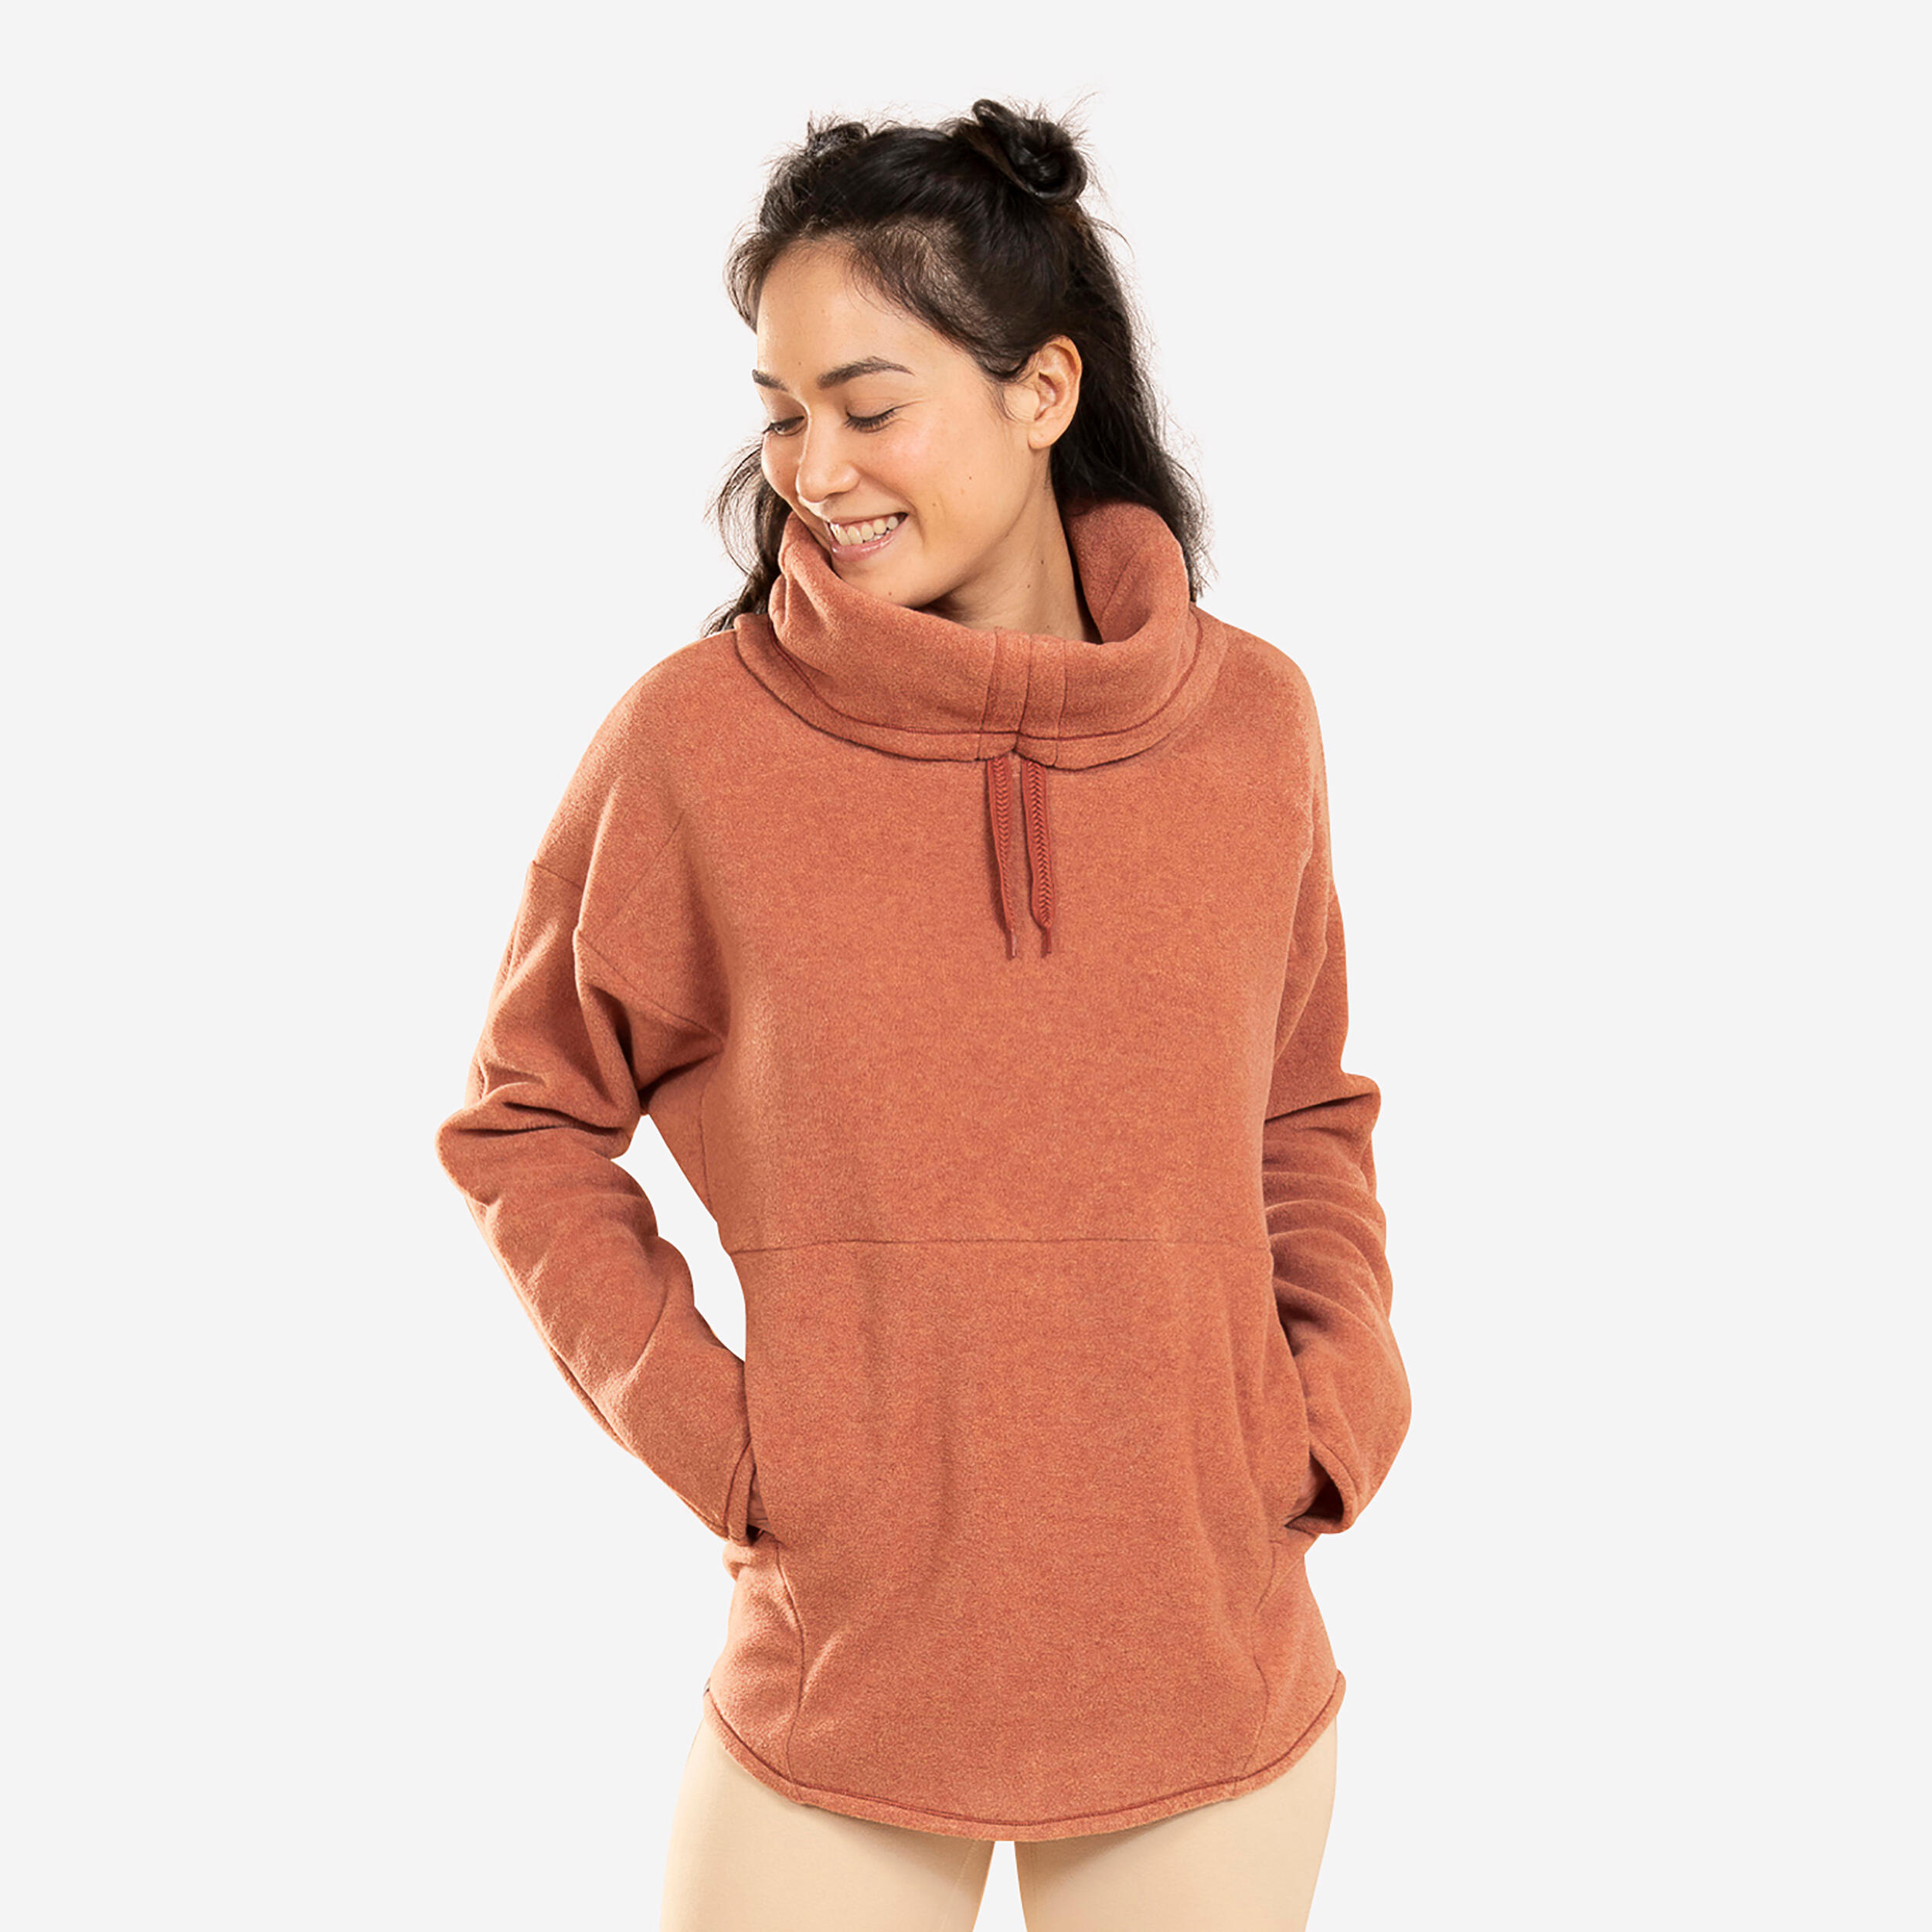 Plush Yoga Hoodie For Women Lightweight, Compact, And Perfect For